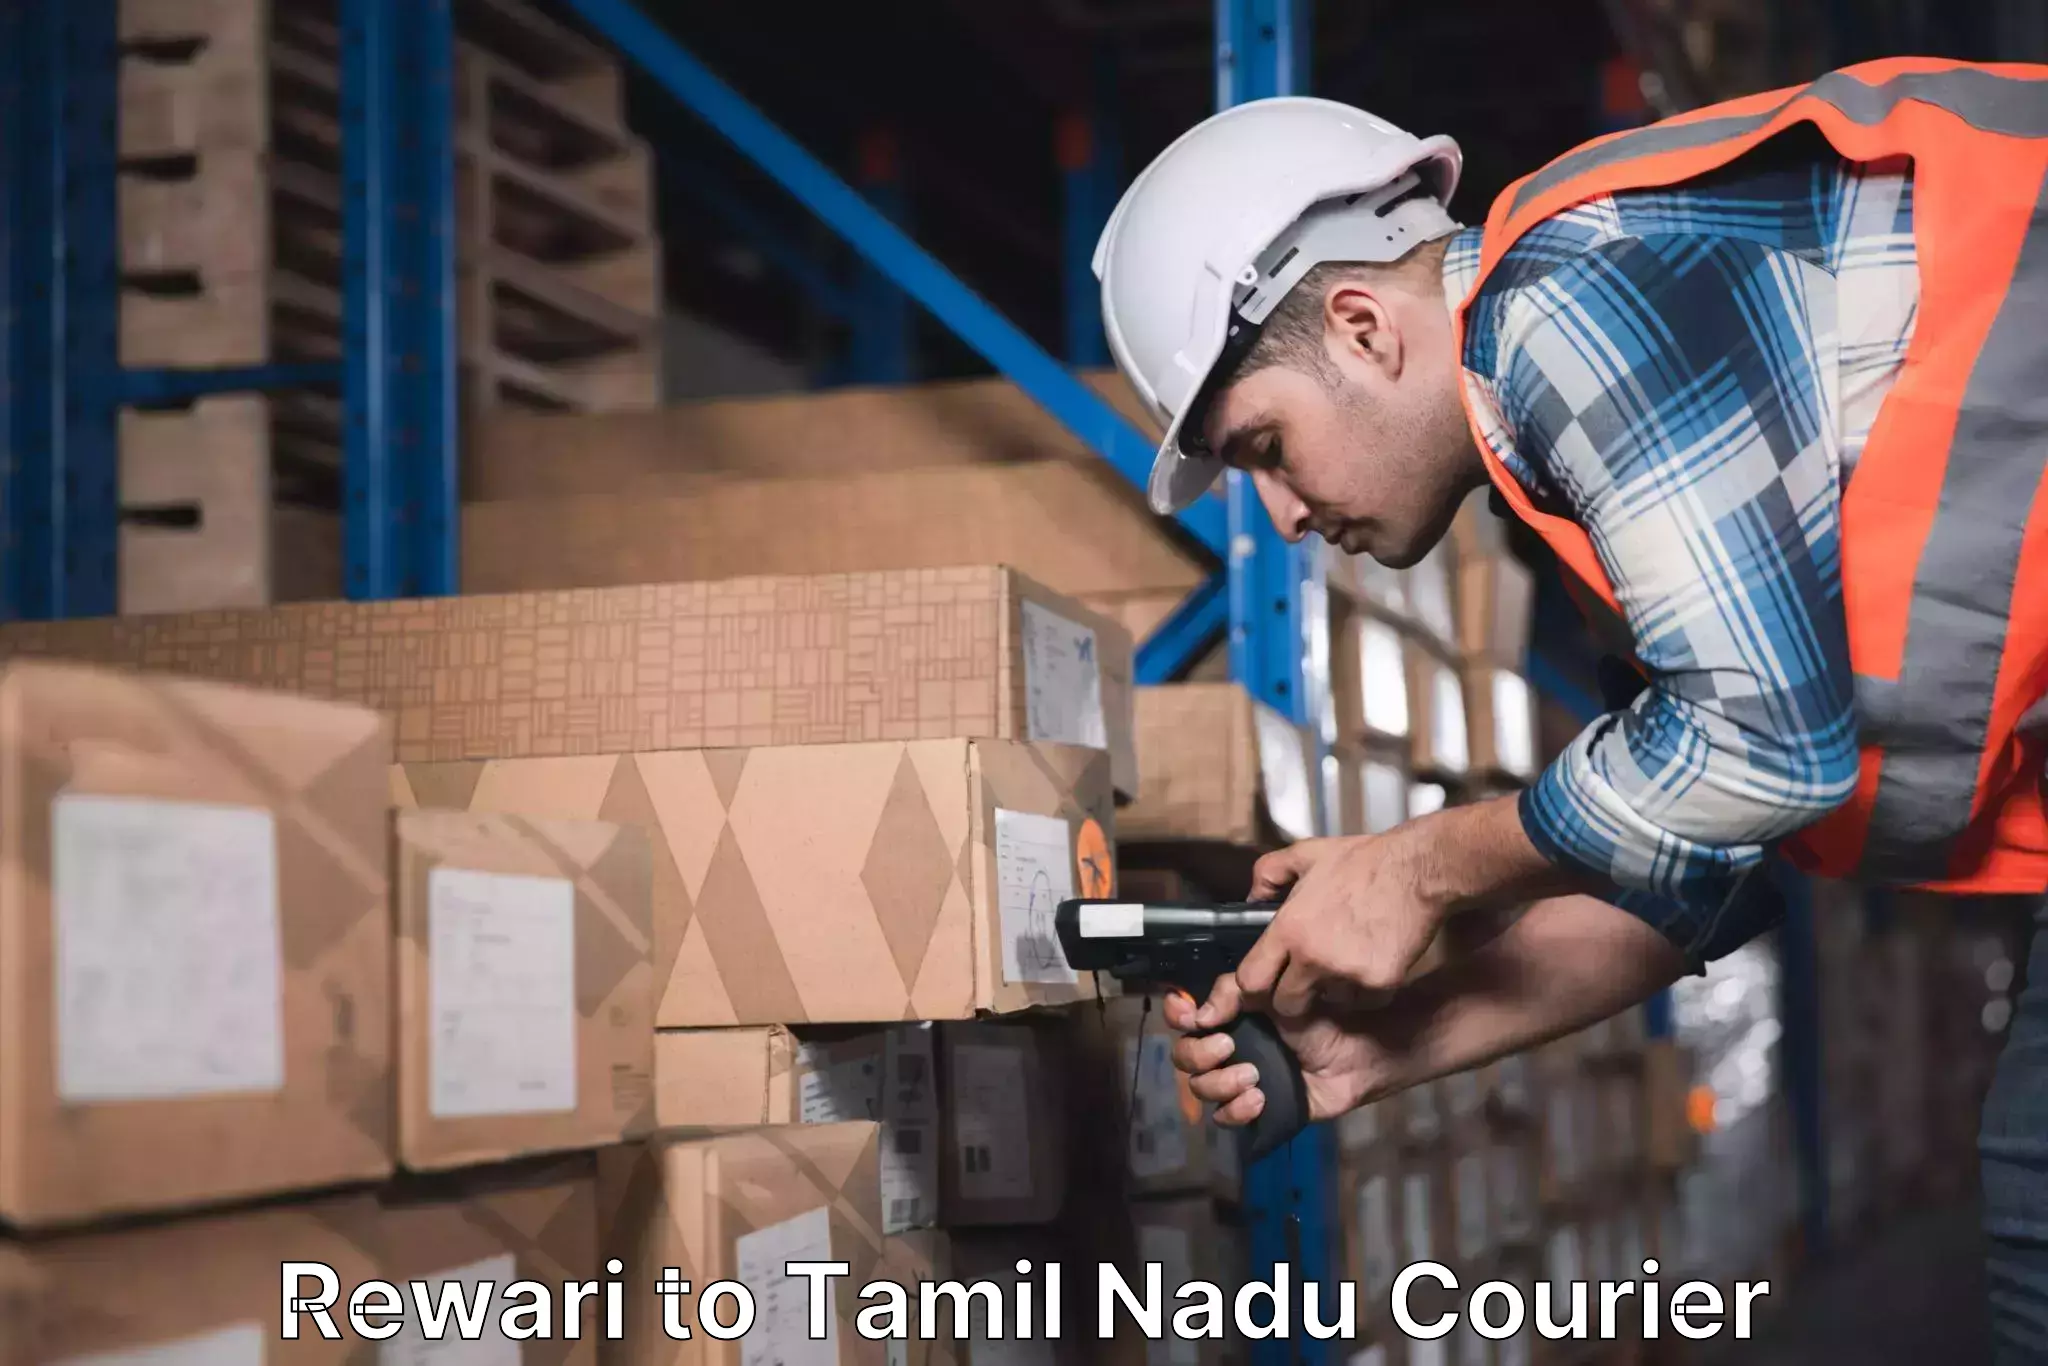 Overnight delivery services Rewari to Ennore Port Chennai